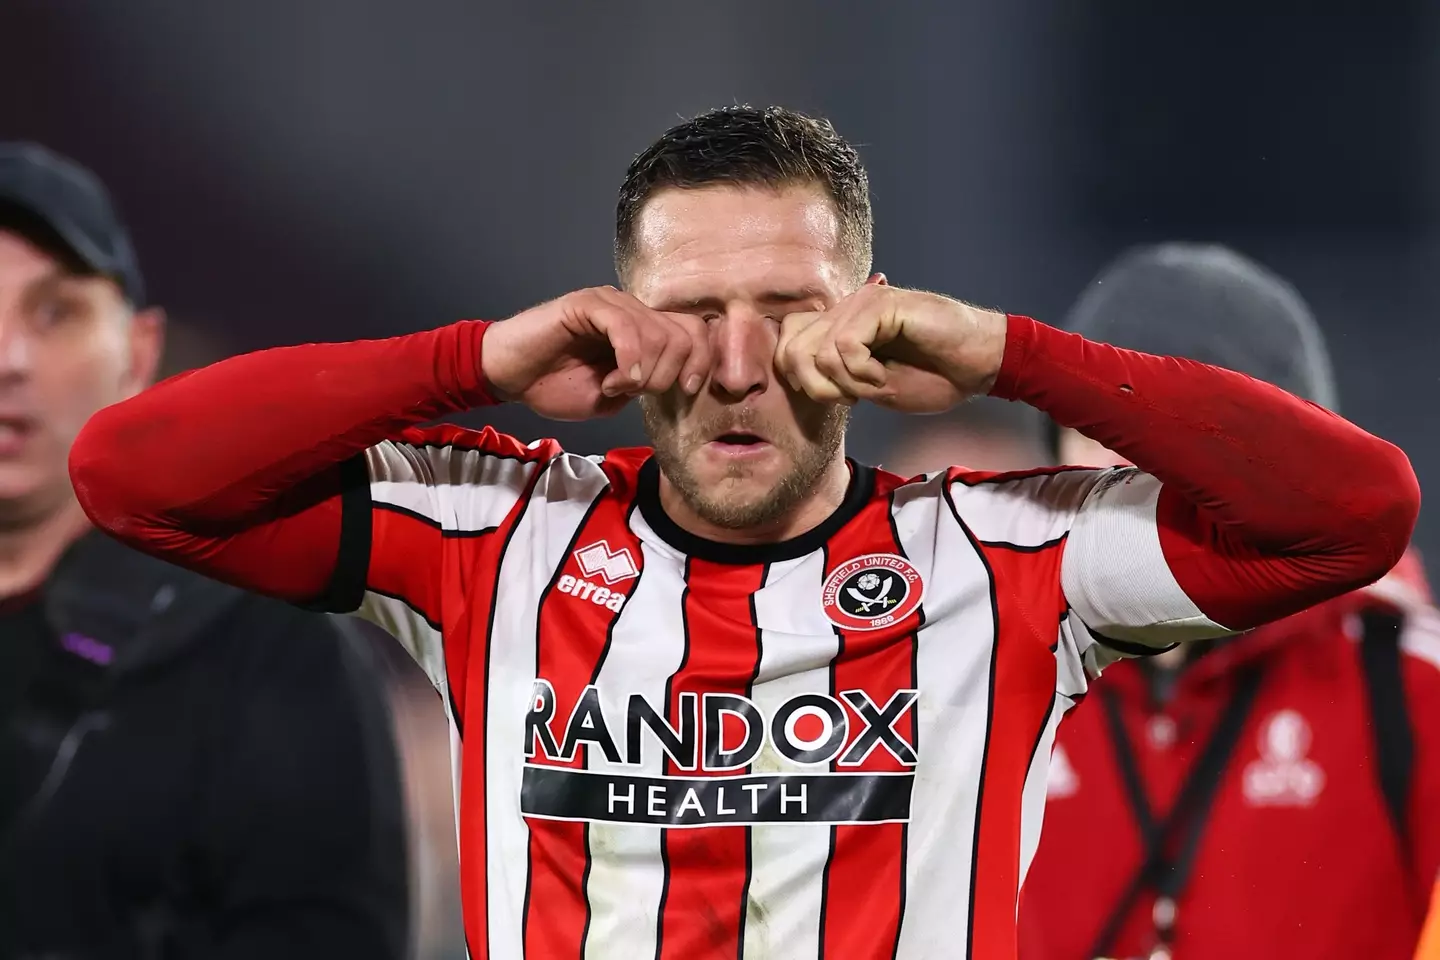 Billy Sharp aims a dig at Wrexham fans following the result. Image: Getty